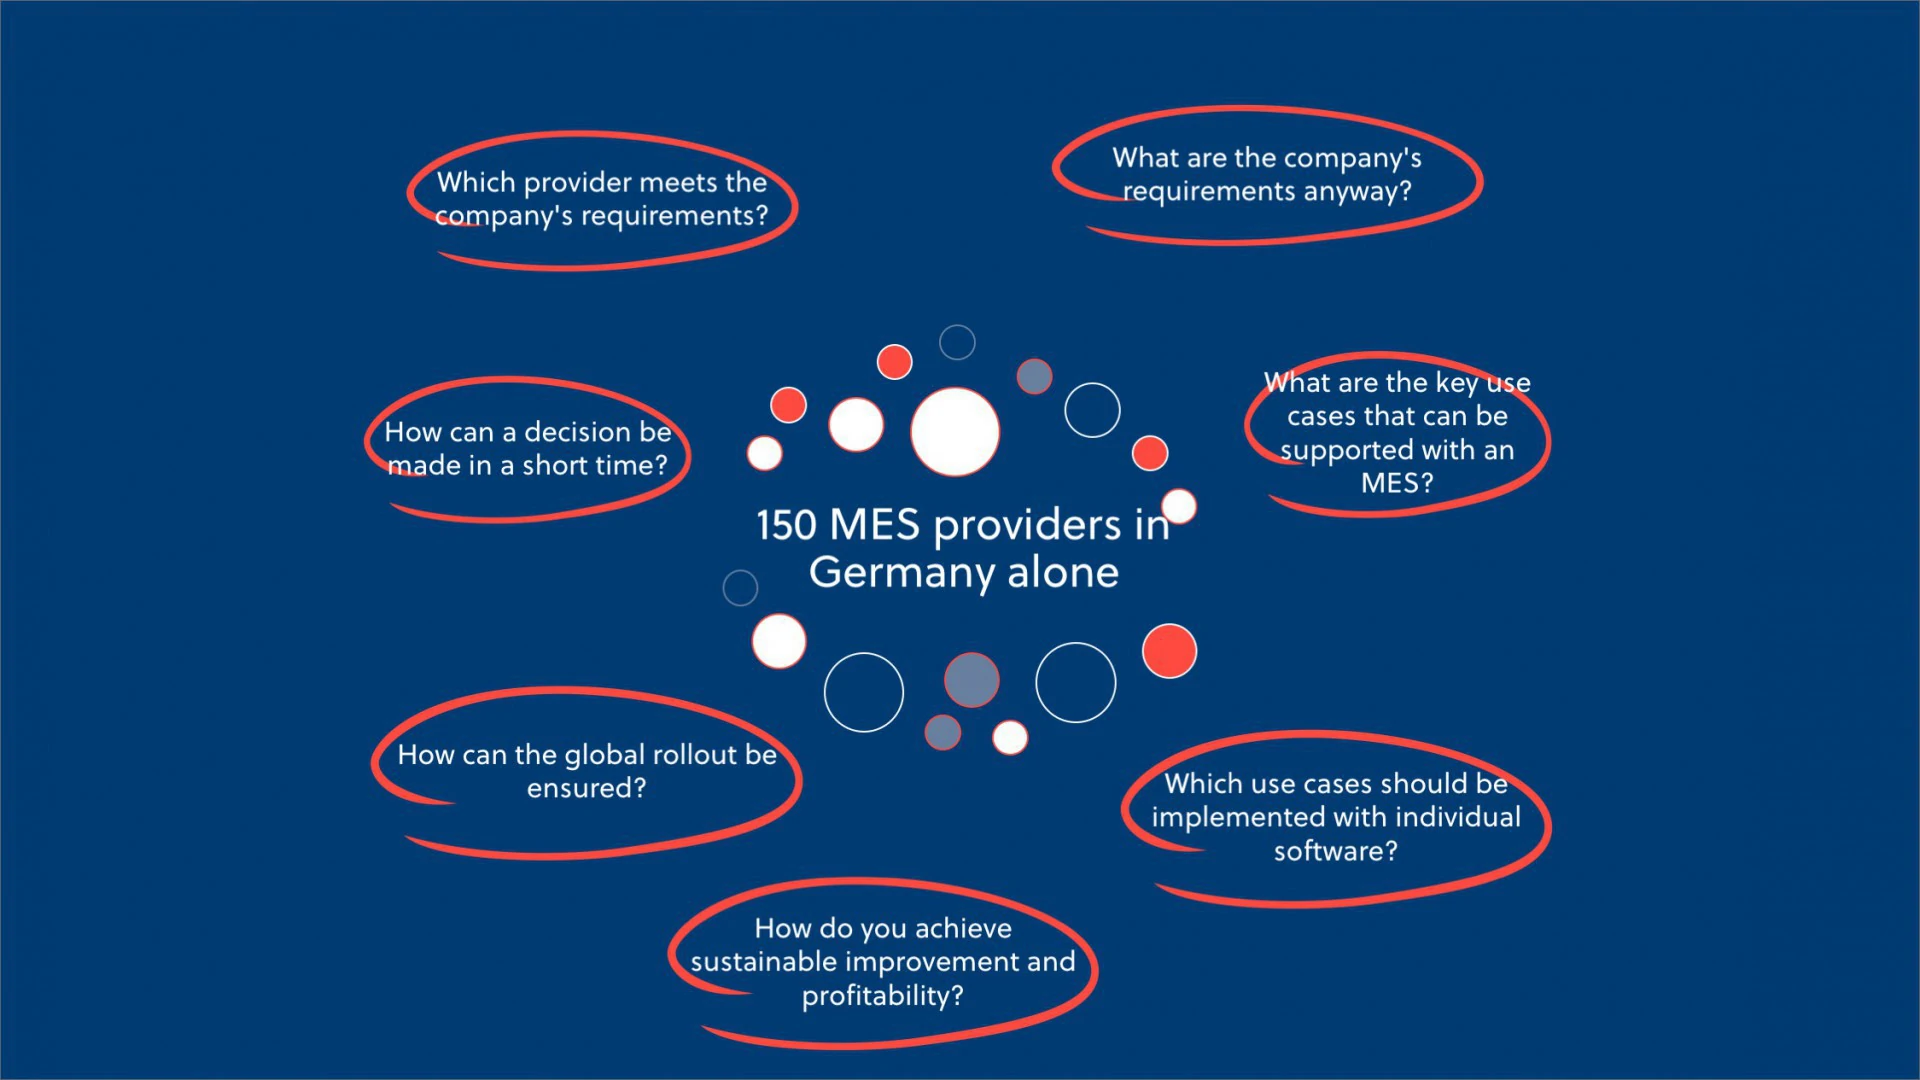 Initial situation: The selection of the right MES provider is complex.